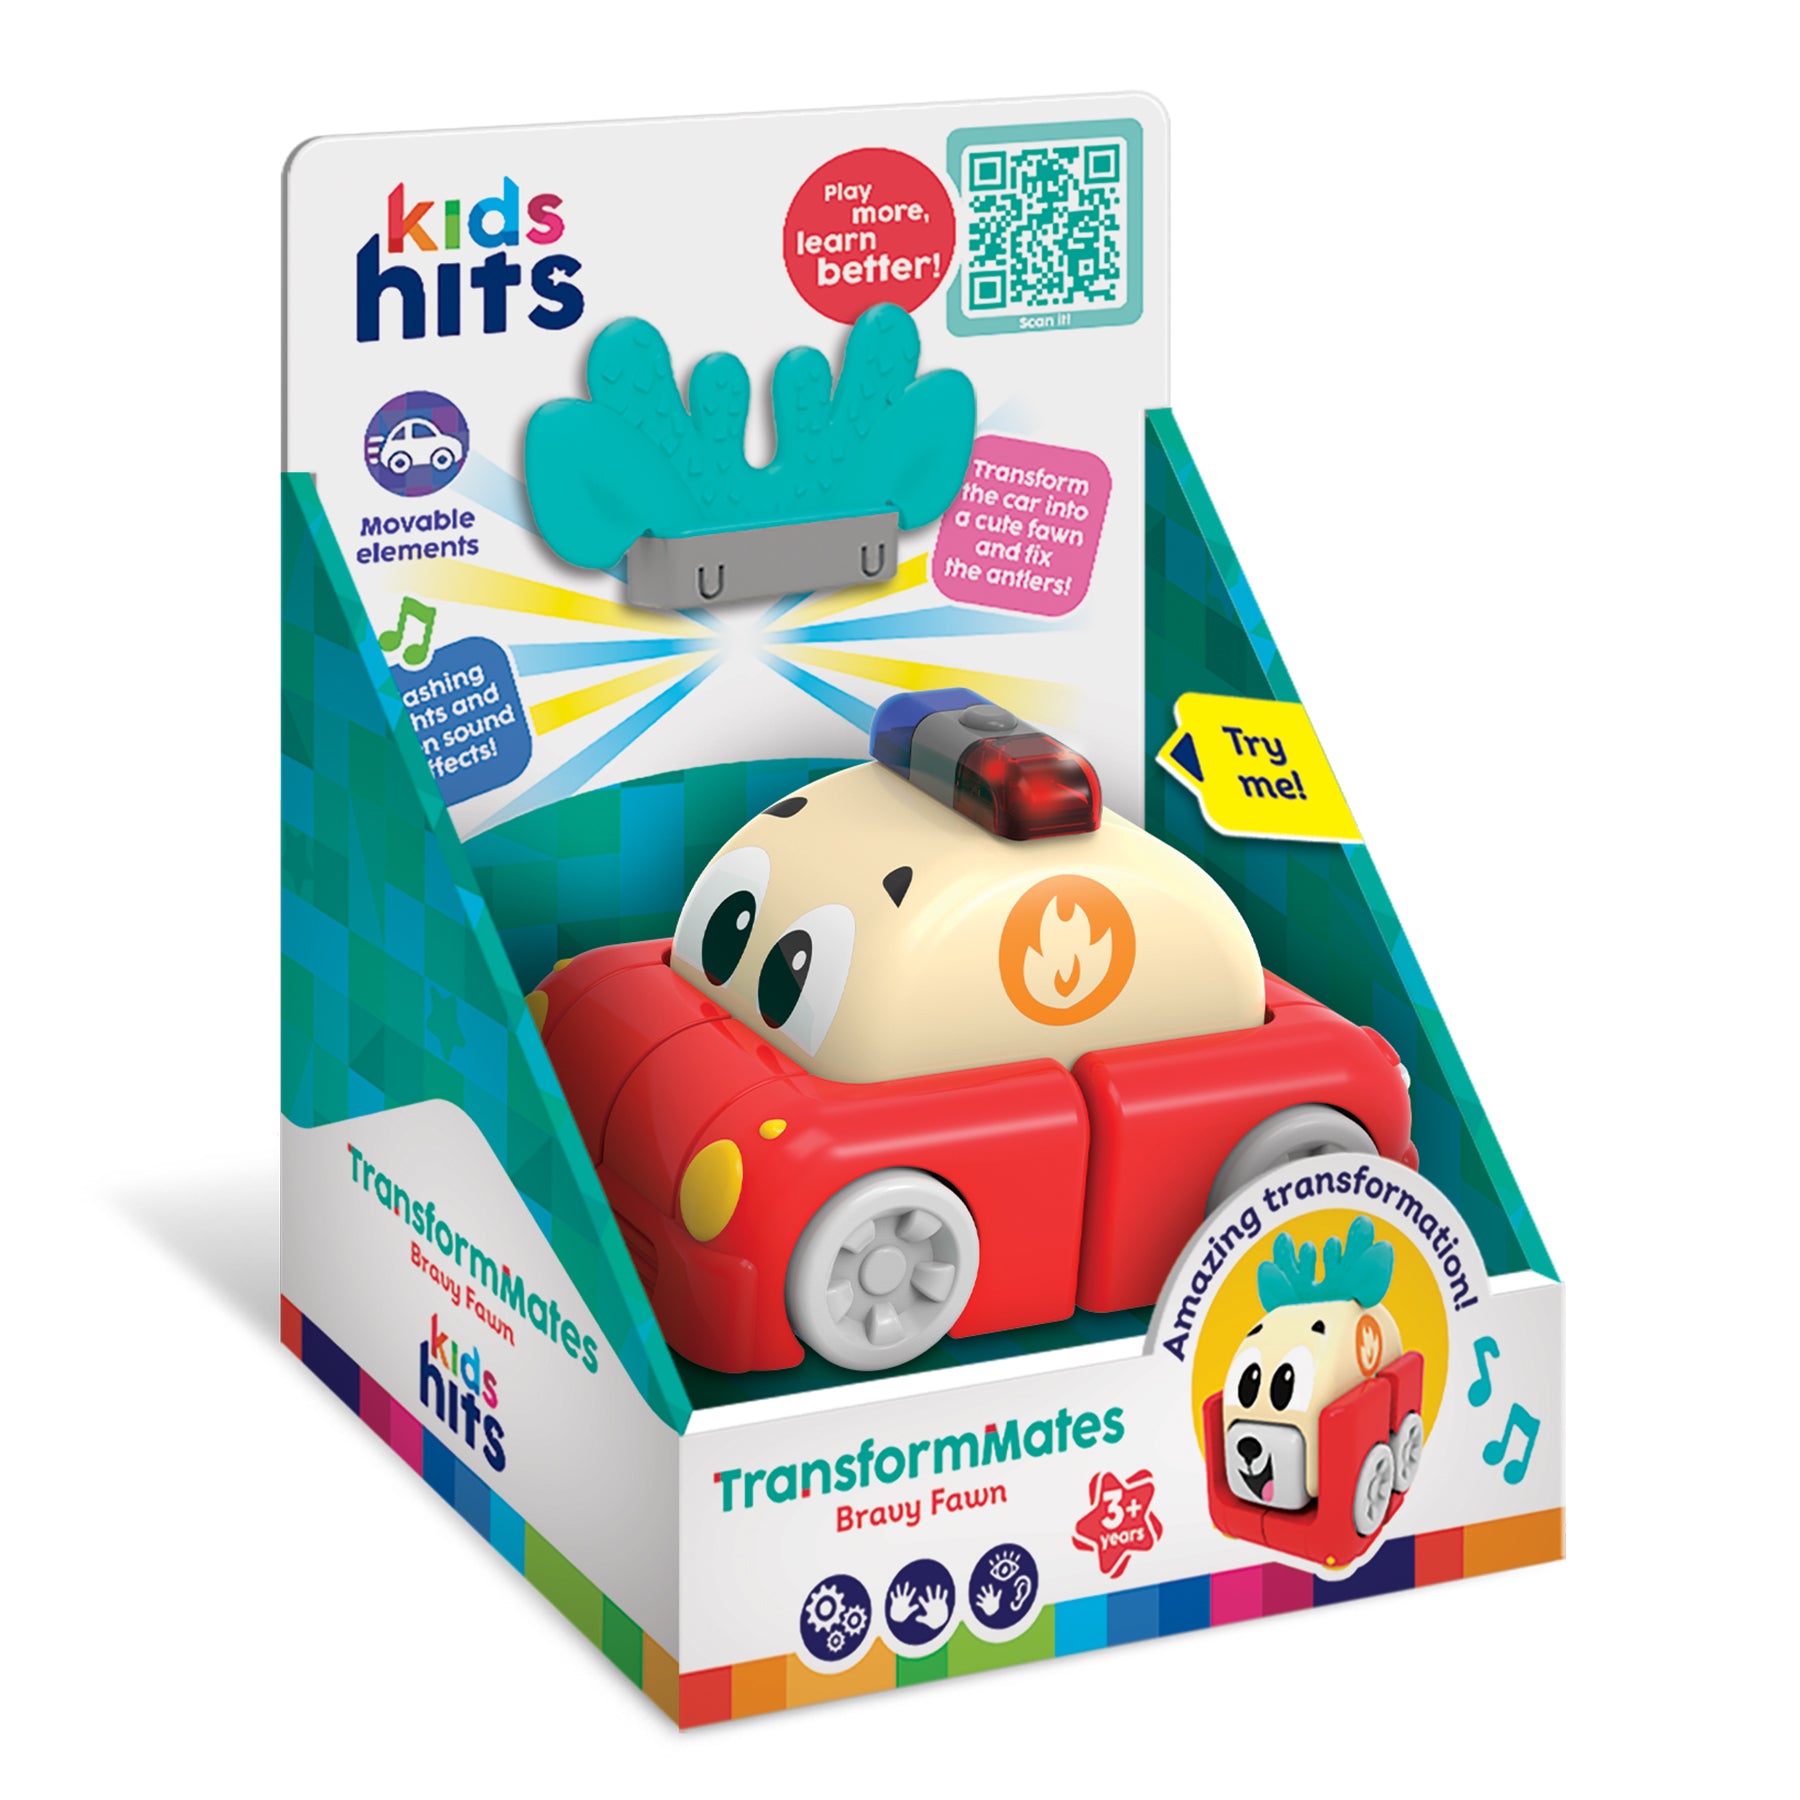 Kids Hits Bravy Fawn TransformMates: A Vibrant and Imaginative Delight for Your Little One!